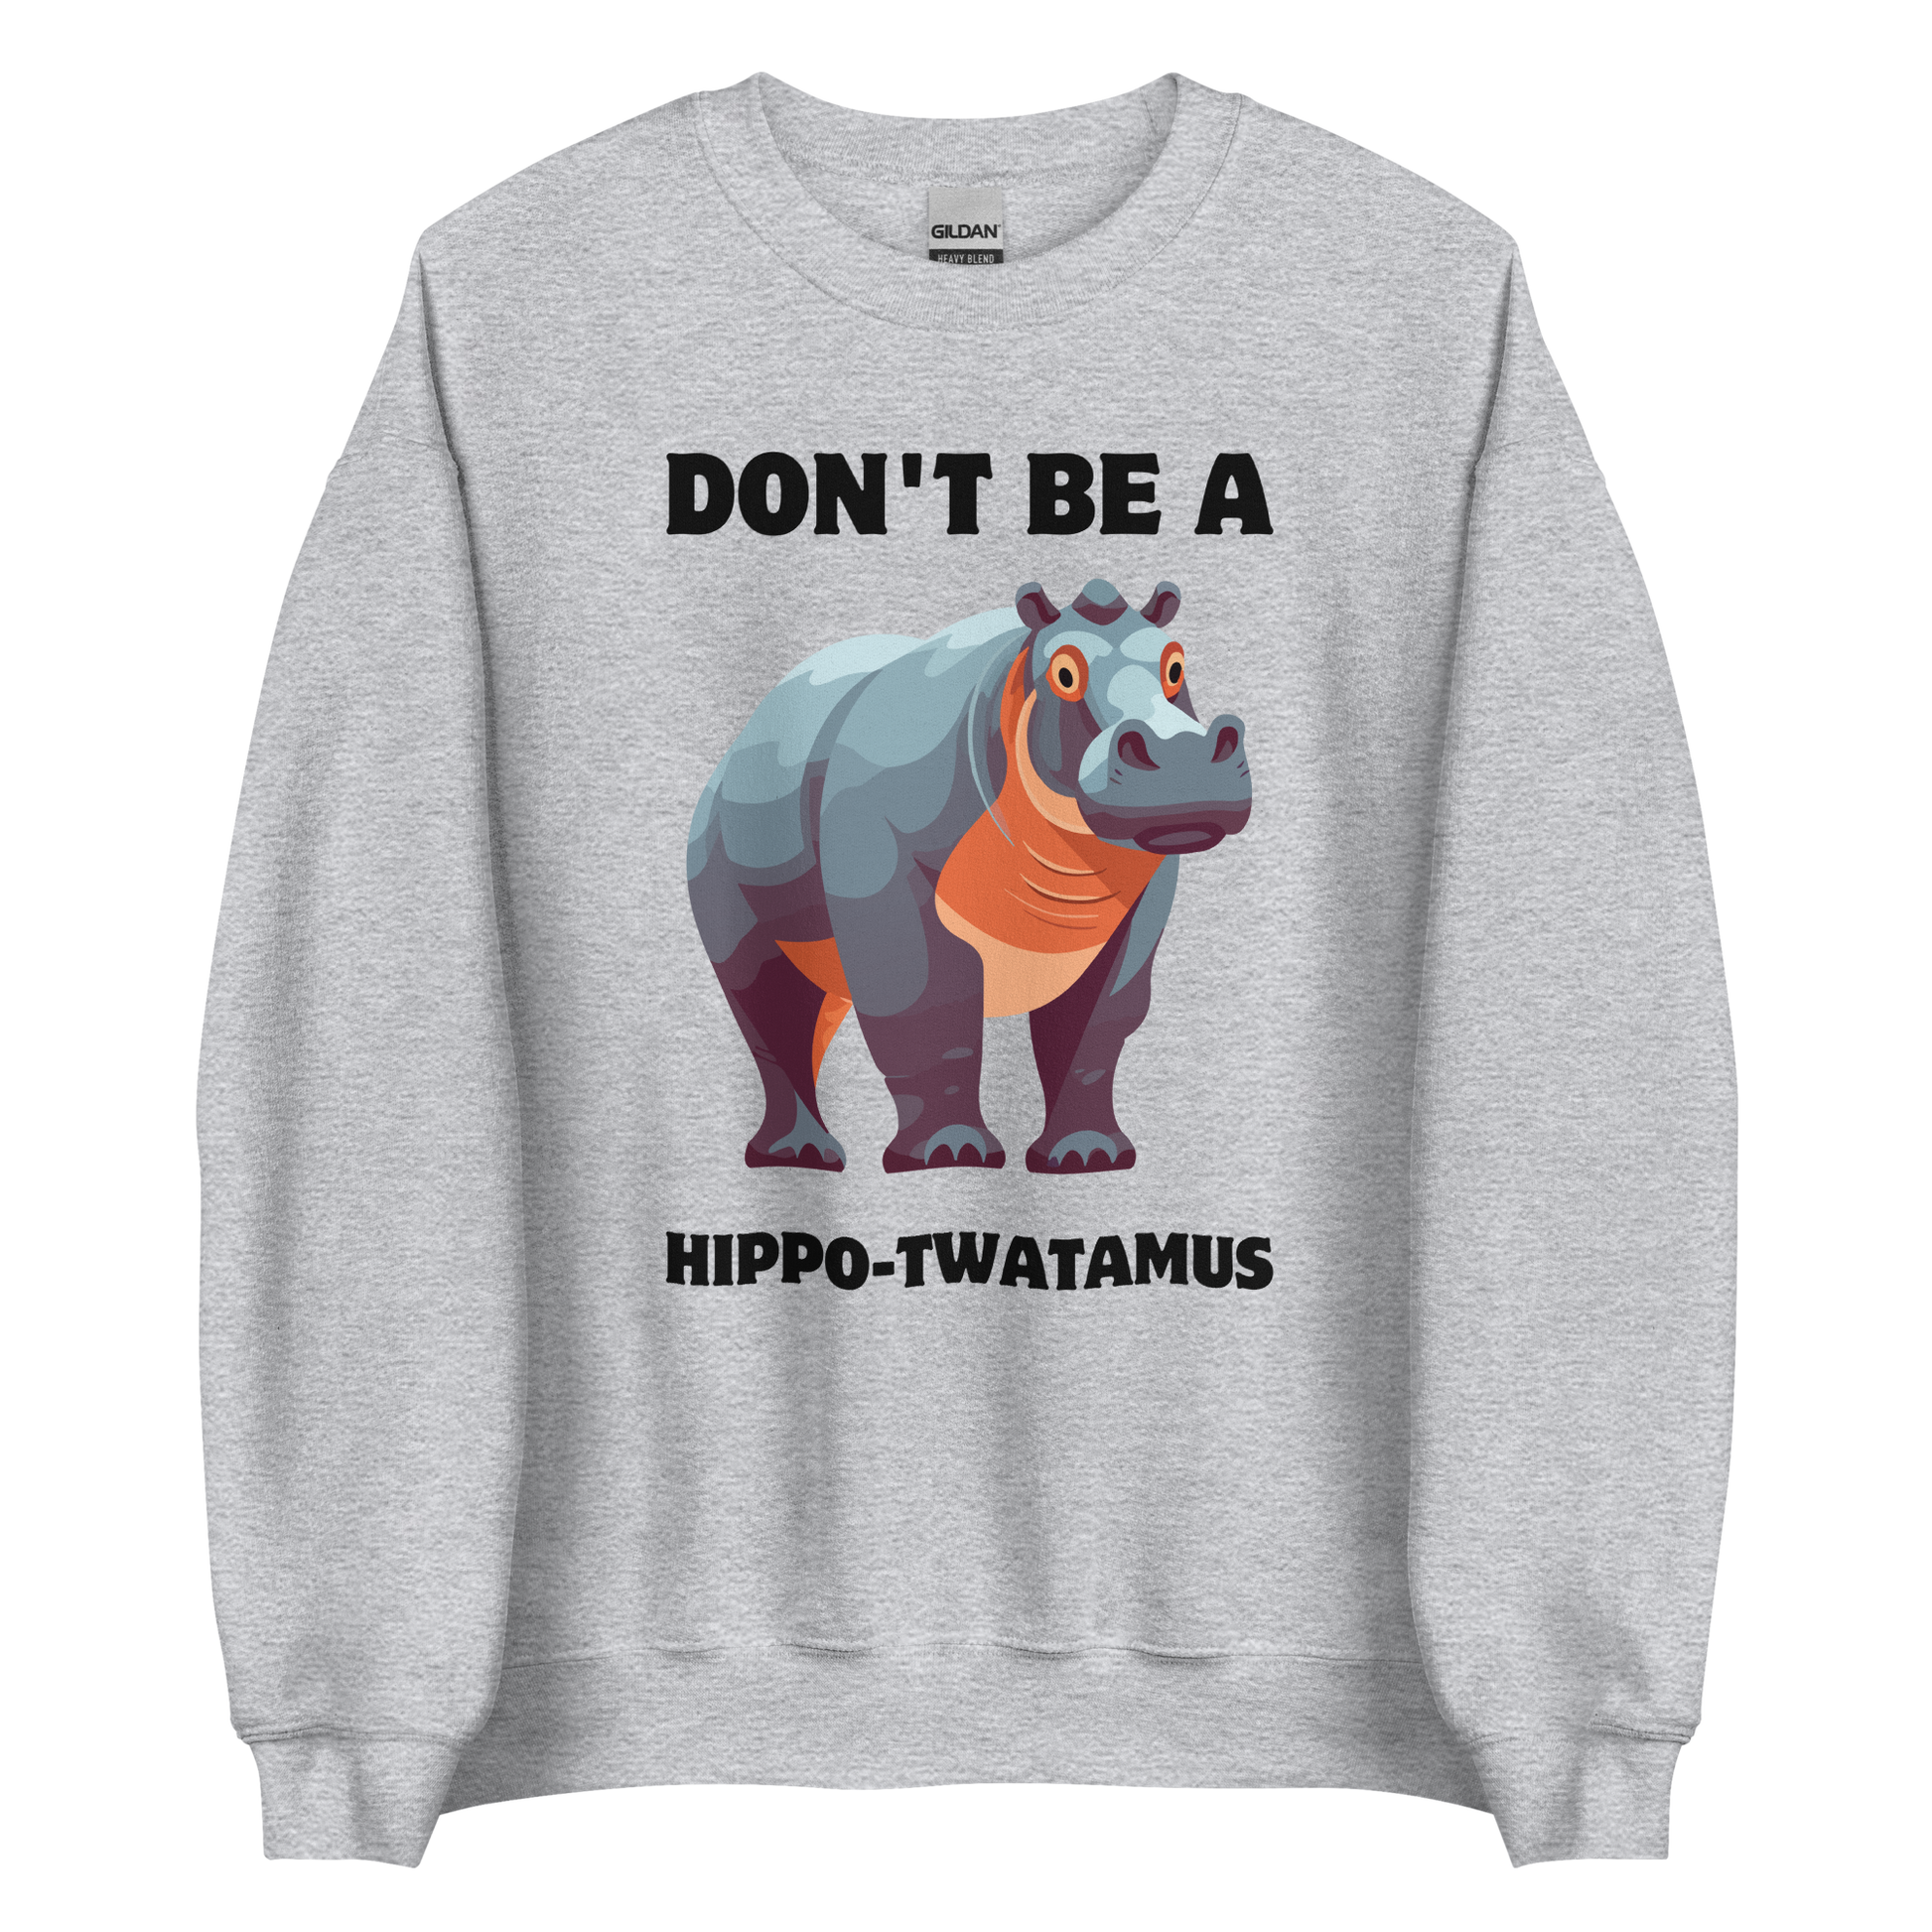 Sport Grey Hippo Sweatshirt featuring a Don't Be a Hippo-Twatamus graphic on the chest - Funny Graphic Hippo Sweatshirts - Boozy Fox